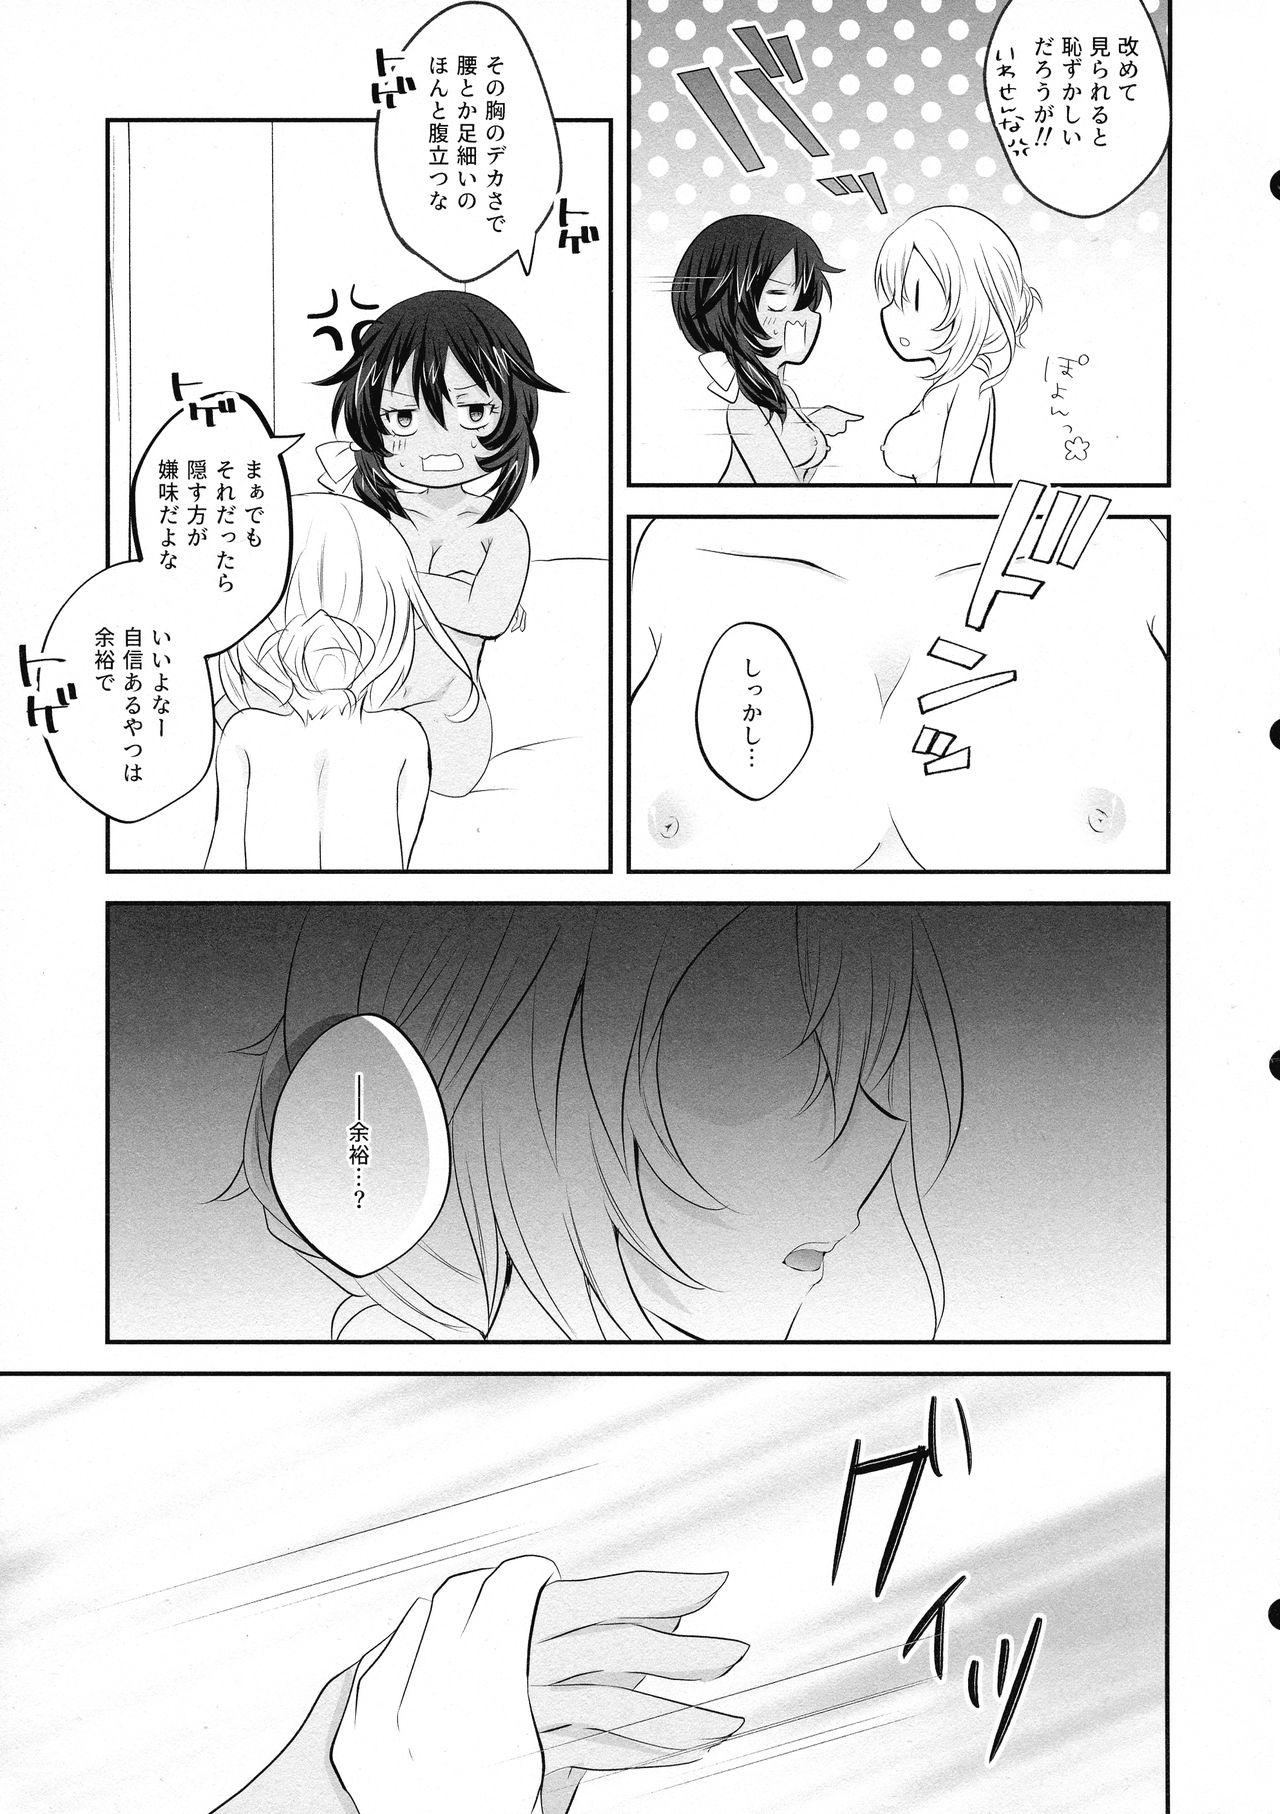 Male Moonlight Melody - Girls und panzer Cougars - Page 11